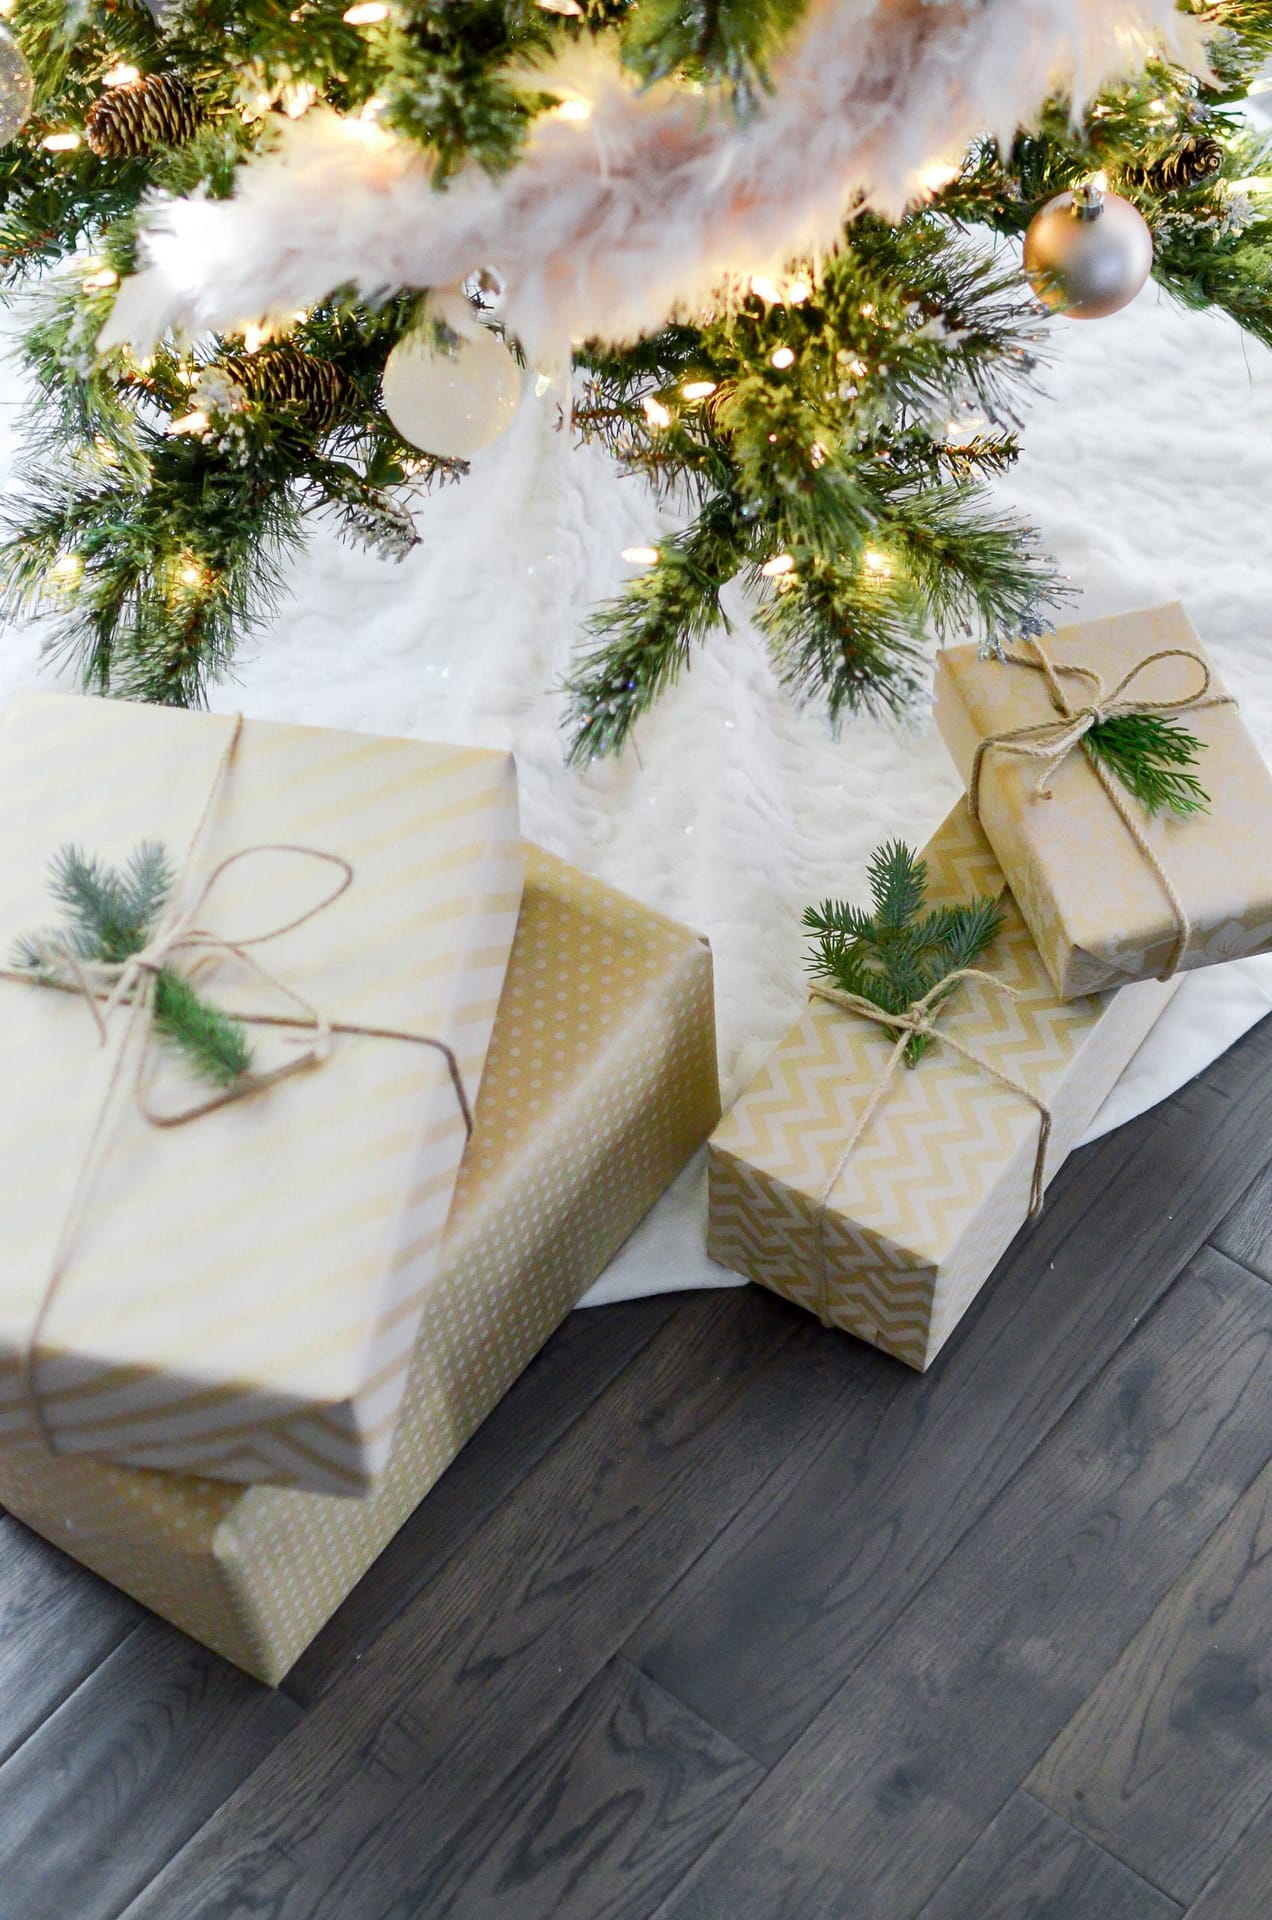 6 Tips To Handle Holiday Returns